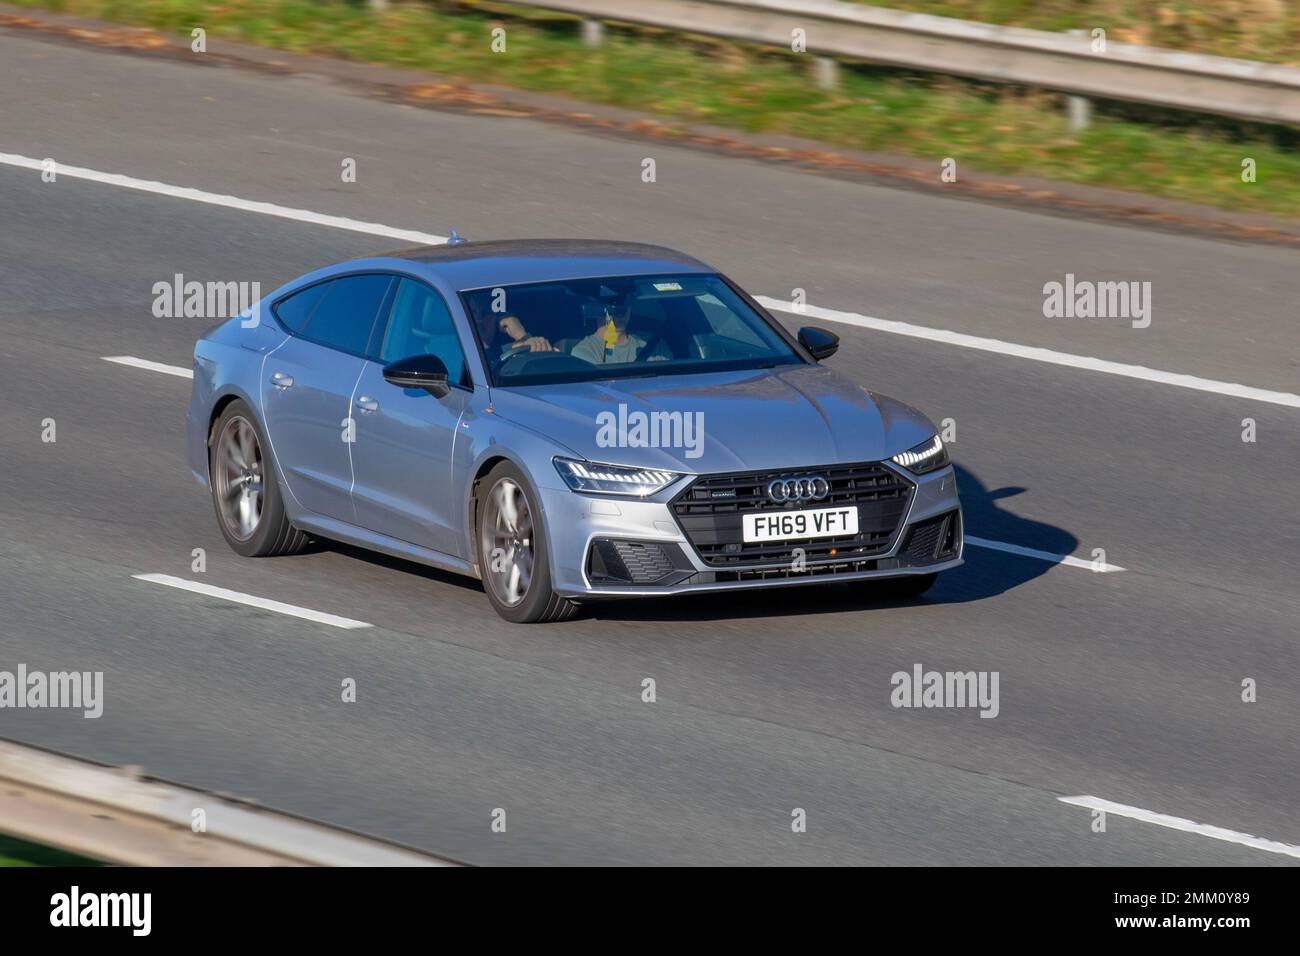 2020 (69) Silver AUDI A7 S LN  ED 40TDI MHEV Q SA 1968 cc  Electric Diesel 7 speed automatic; travelling on the M61 motorway UK Stock Photo